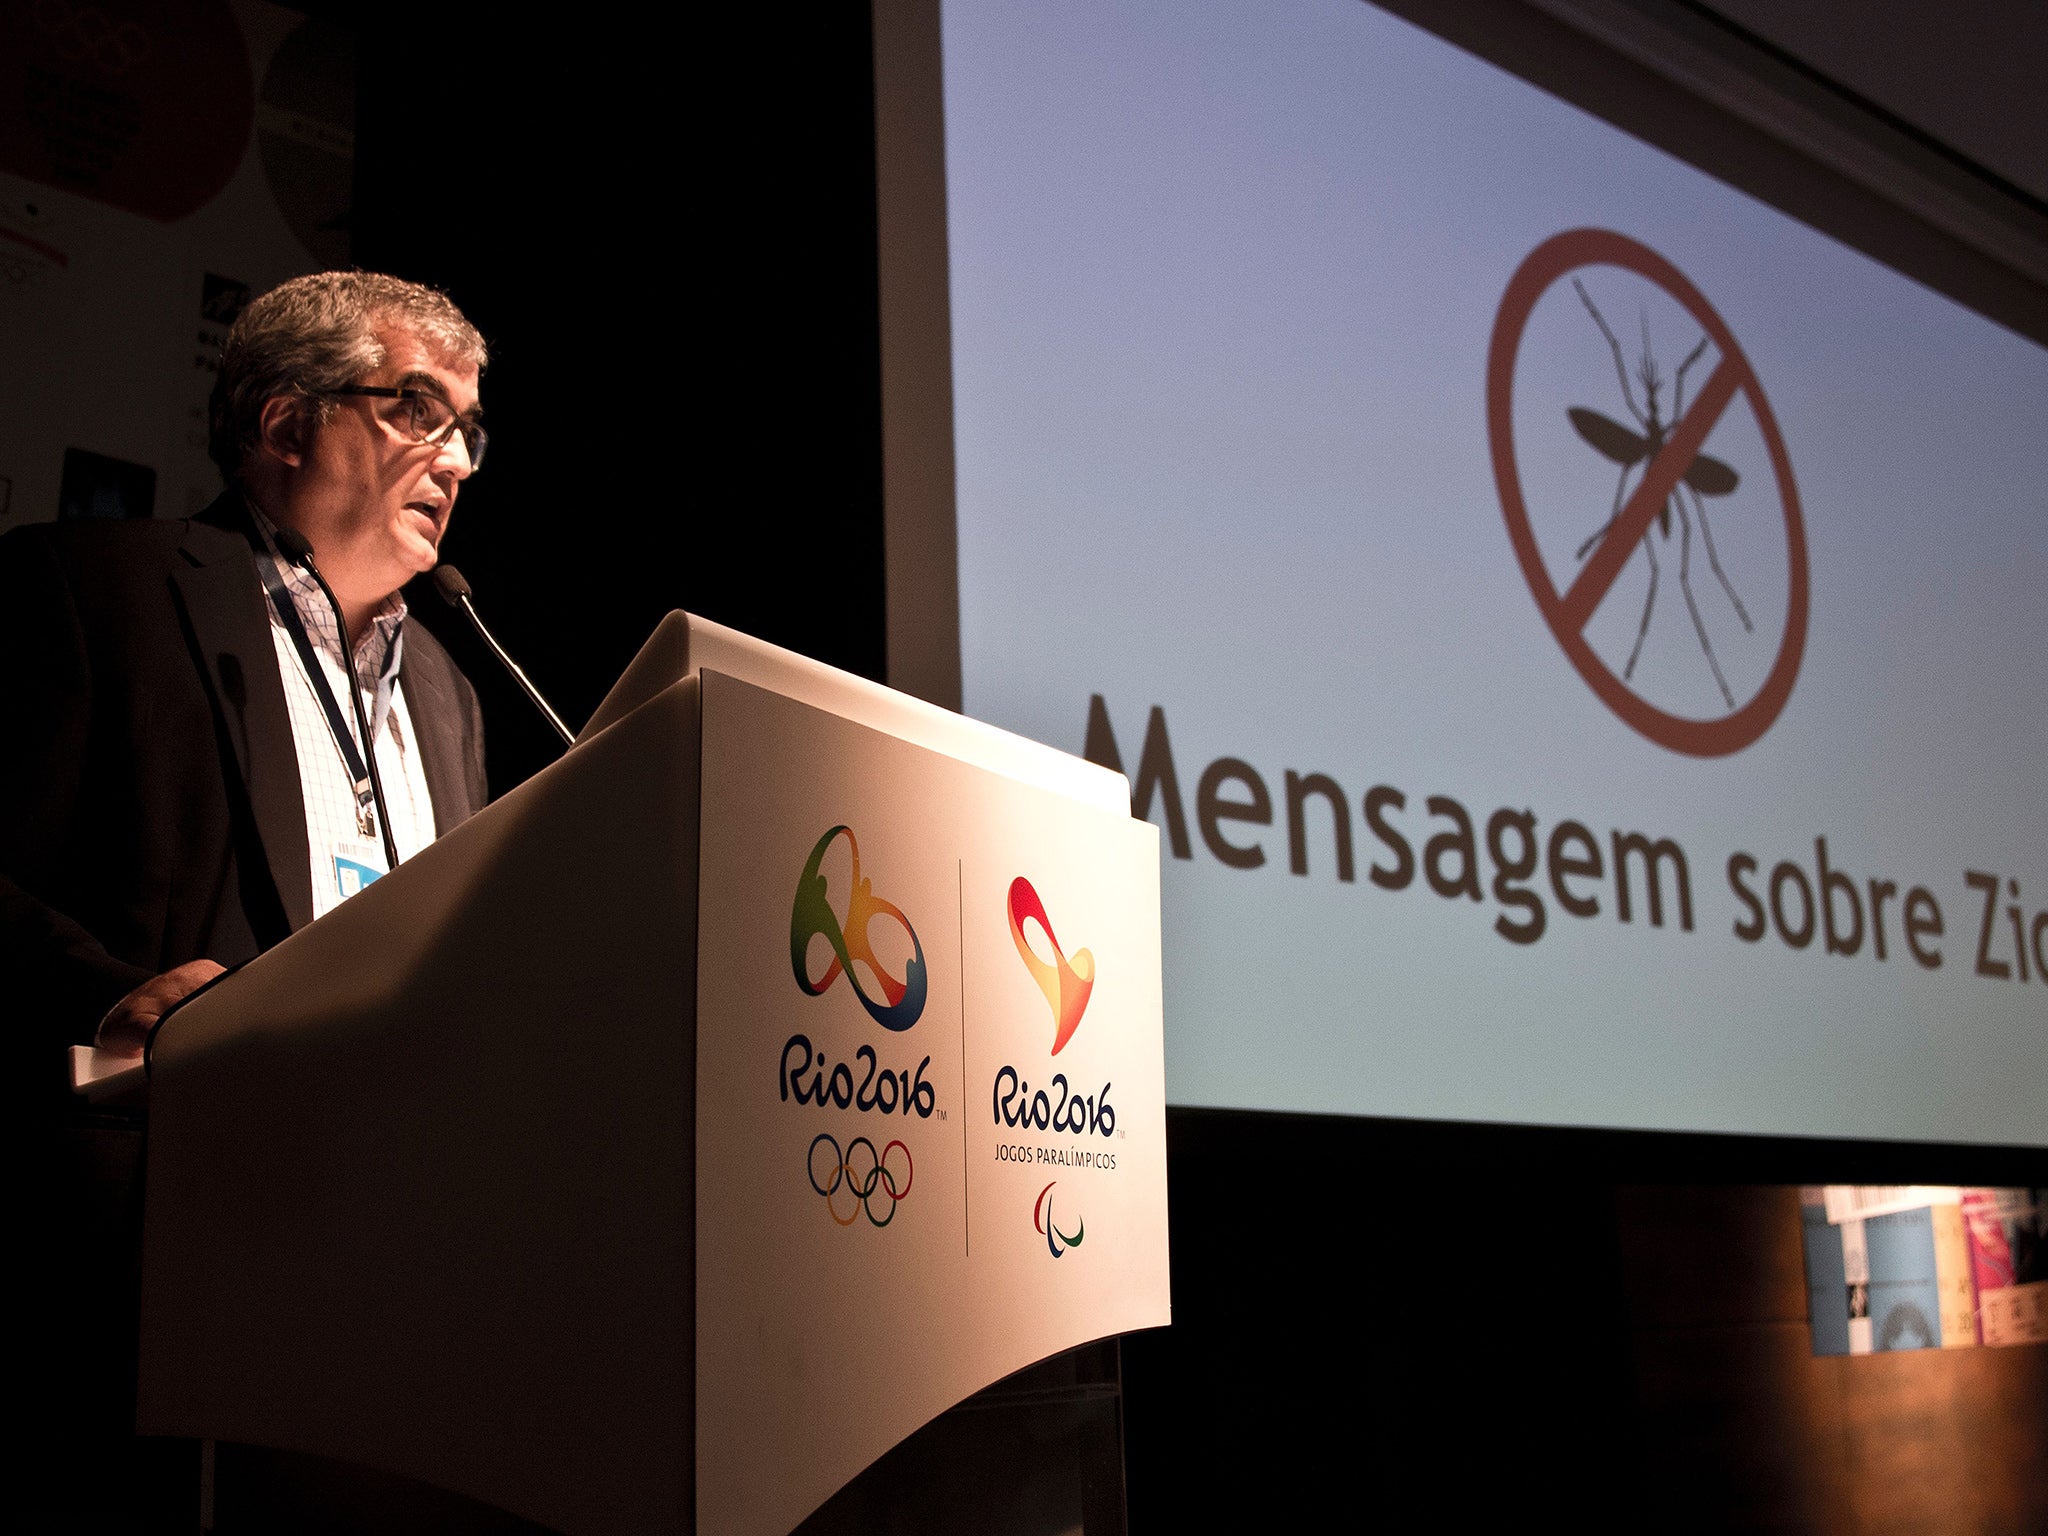 Rio2016 Olympic Games Communications Director Mario Andrada gestures during a press conference in Rio de Janeiro, Brazil